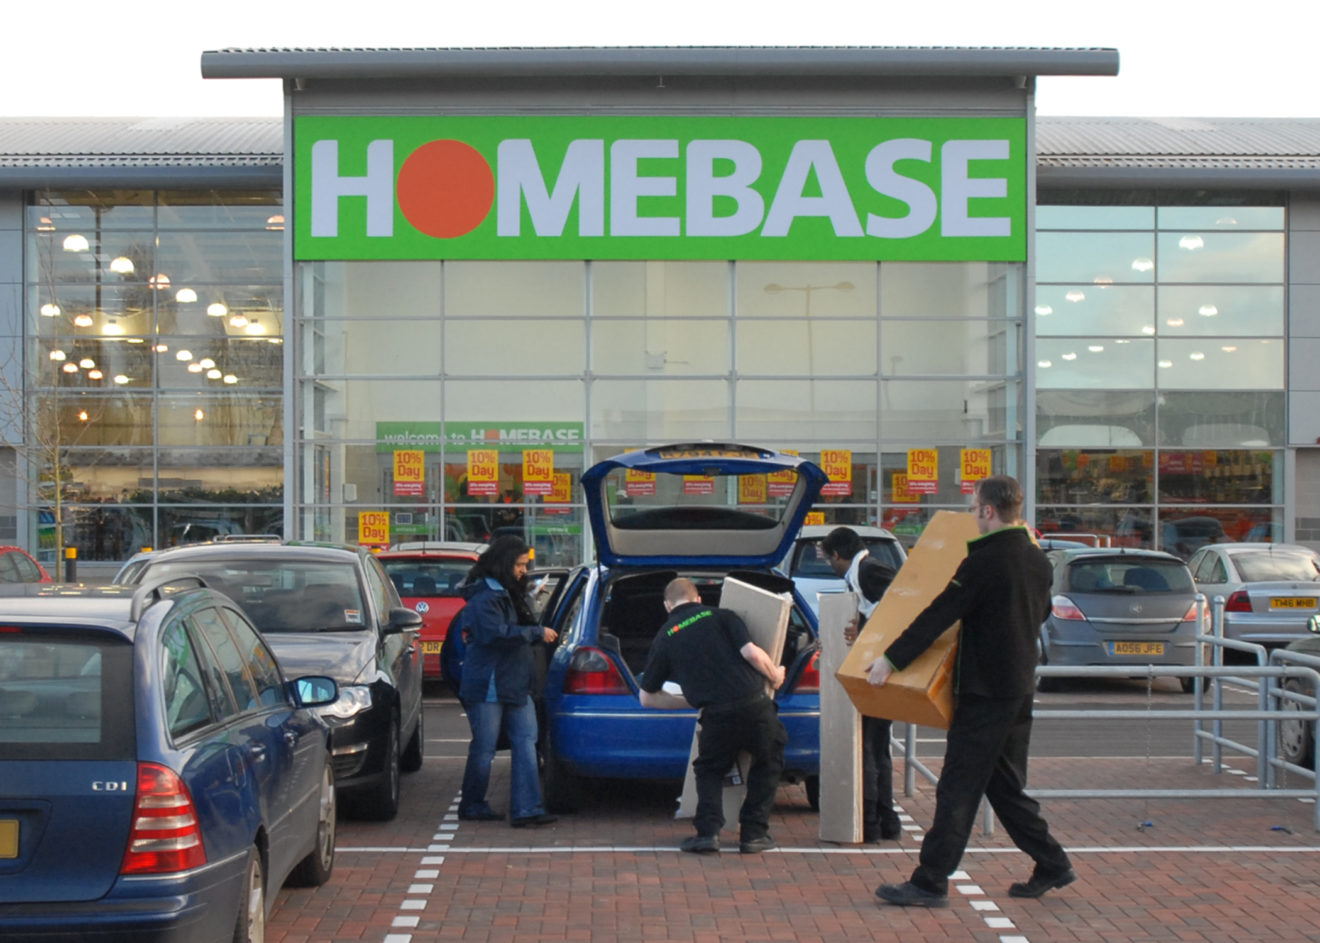 Homebase Named Worst Online Shop In Which Survey 1320x943 